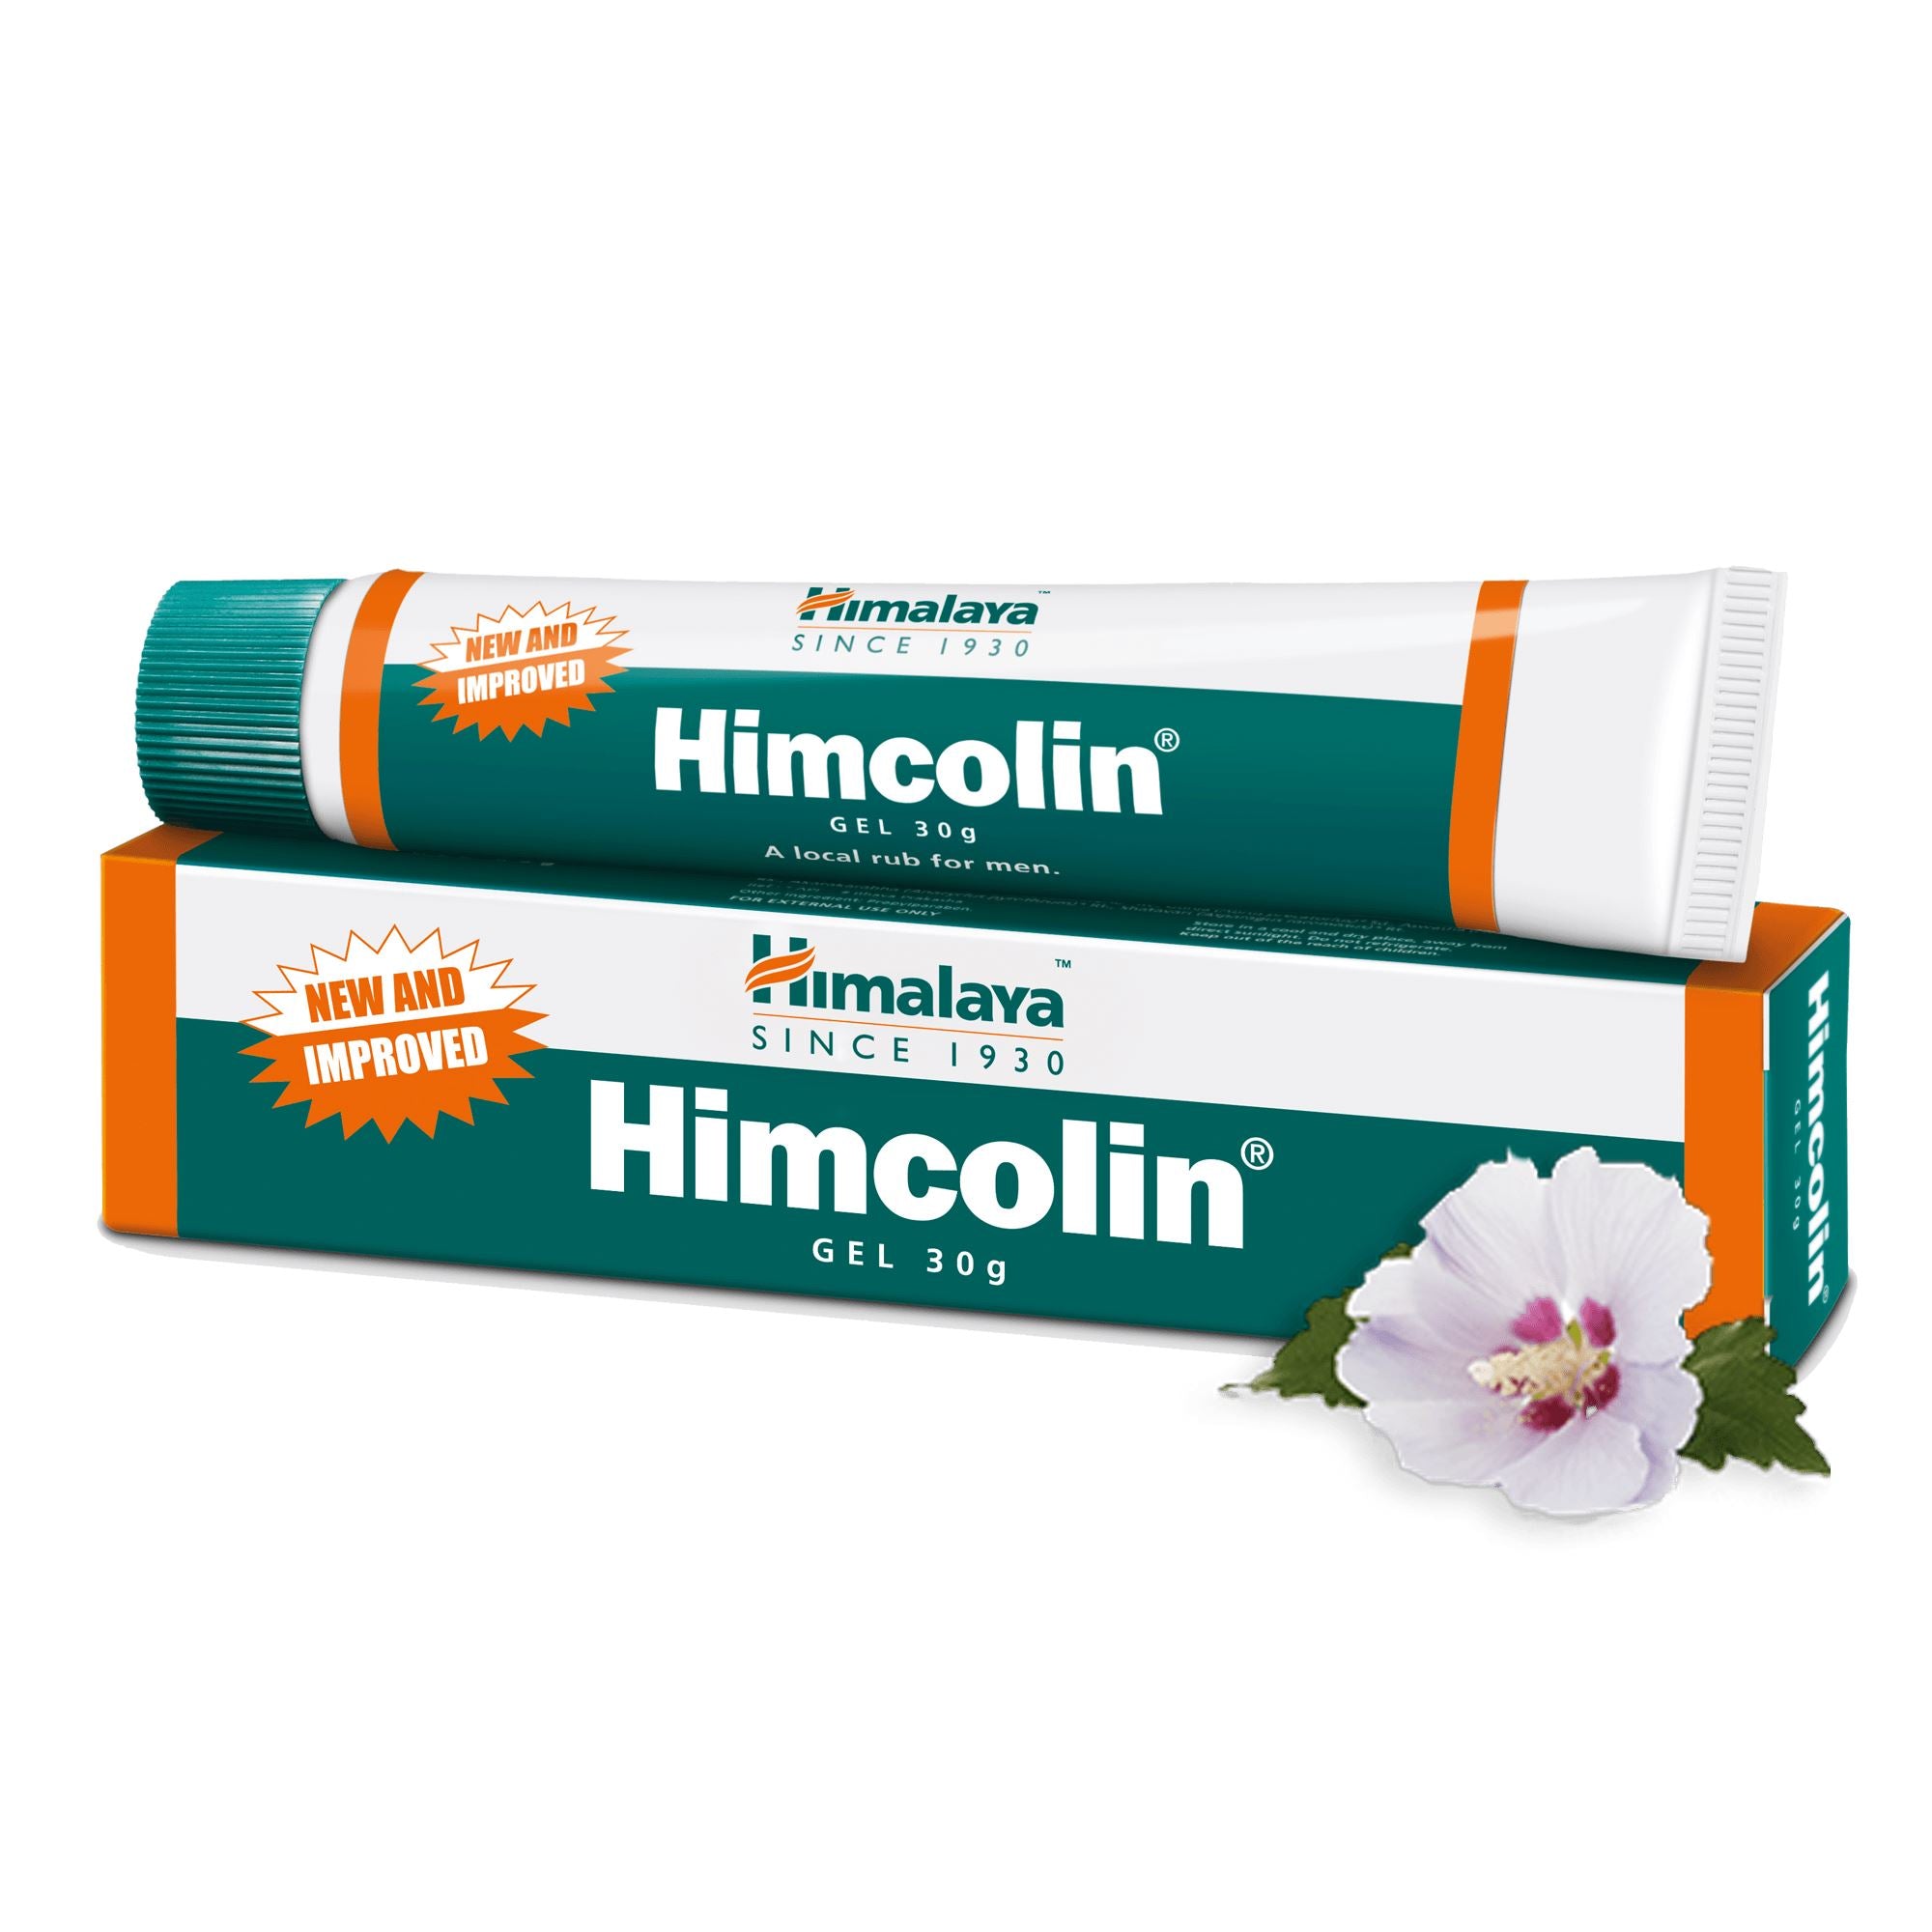 Himalaya Himcolin Gel 30g - Promotes men's sexual health by treating erectile dysfunction